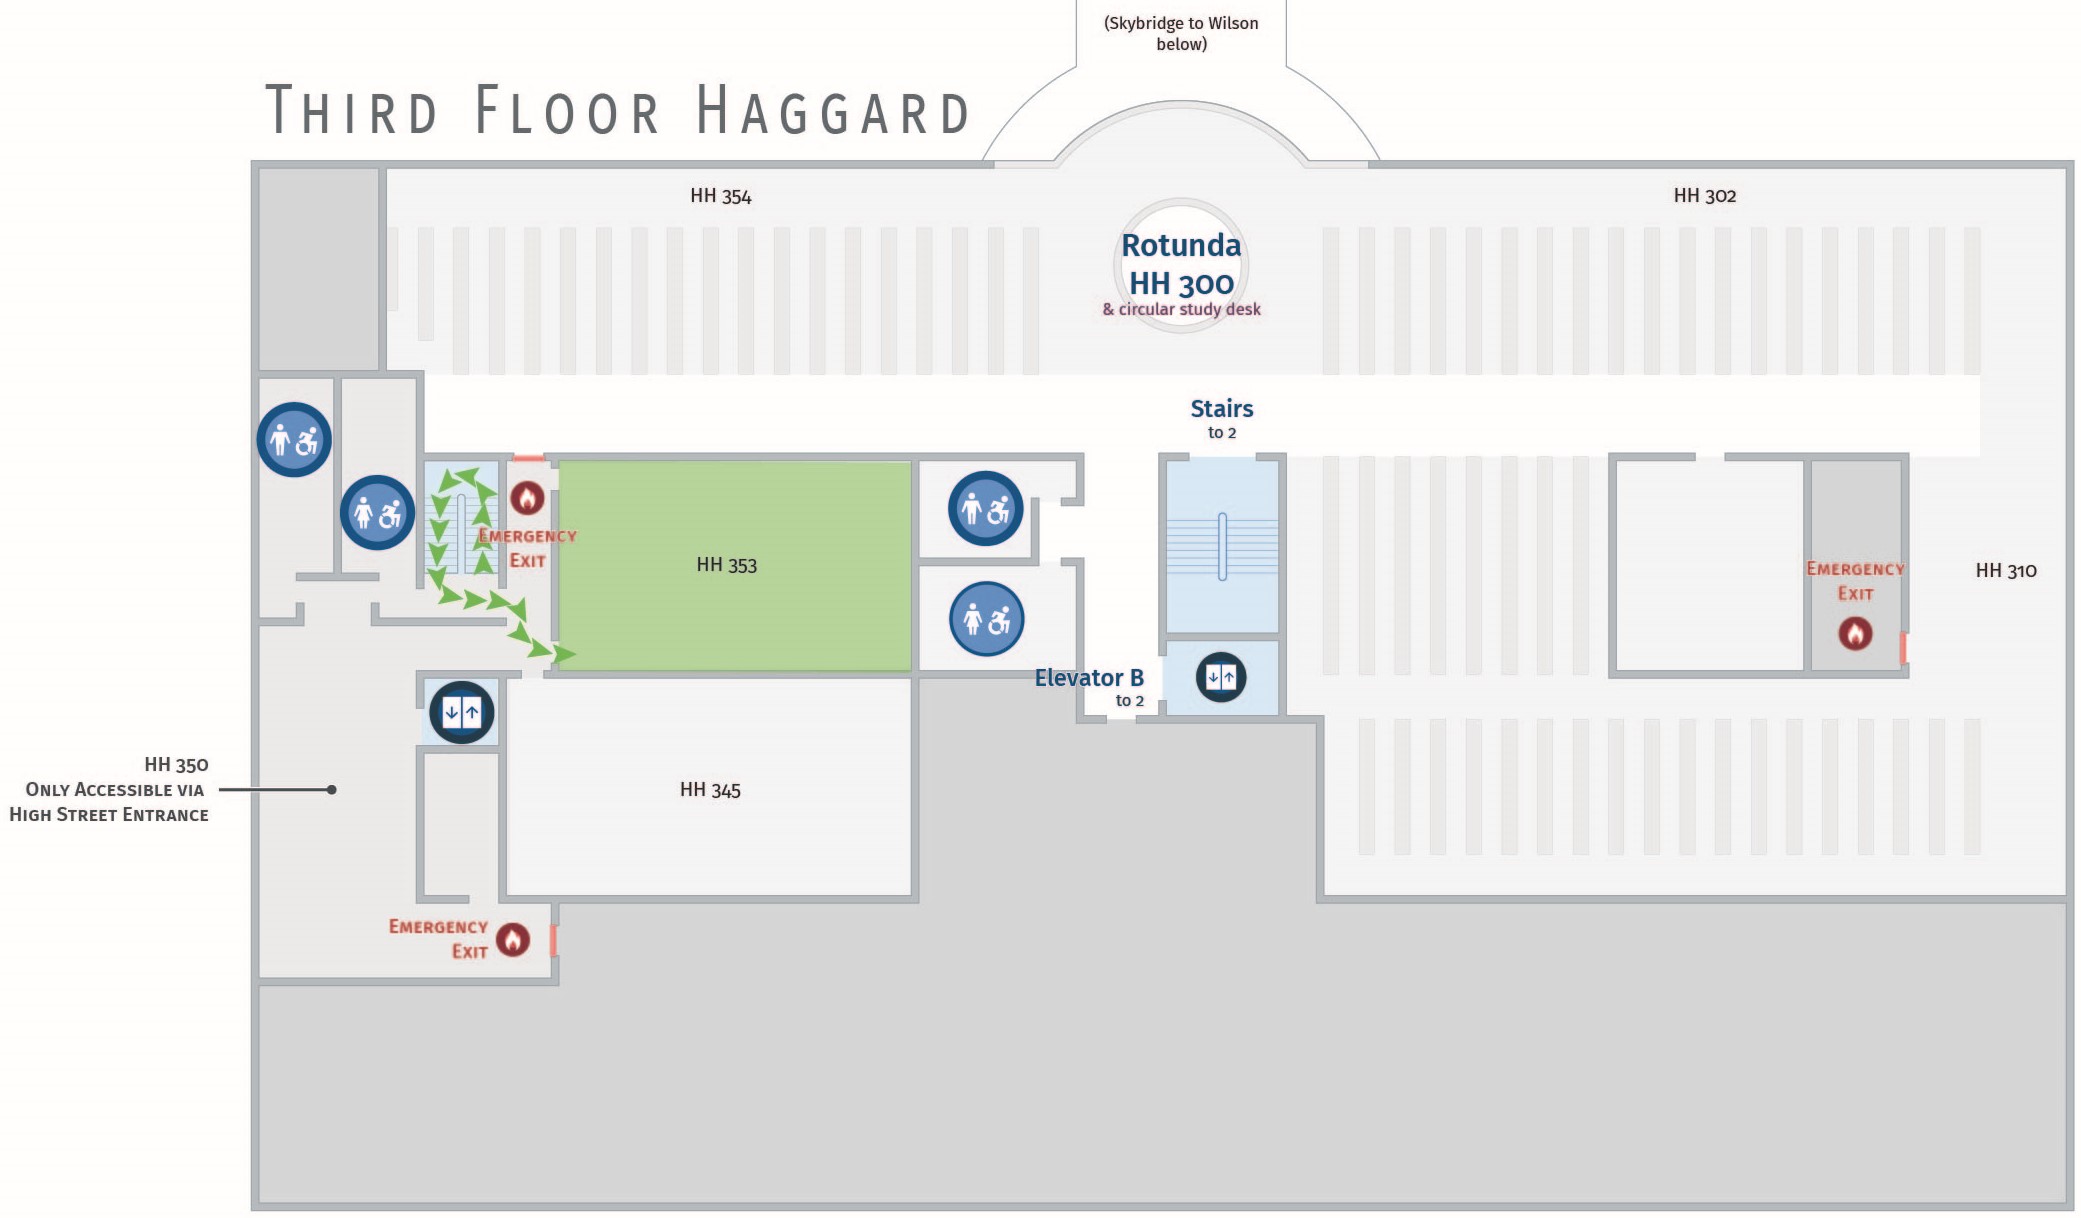 Floor plan, third floor of Haggard with path to HH 353.